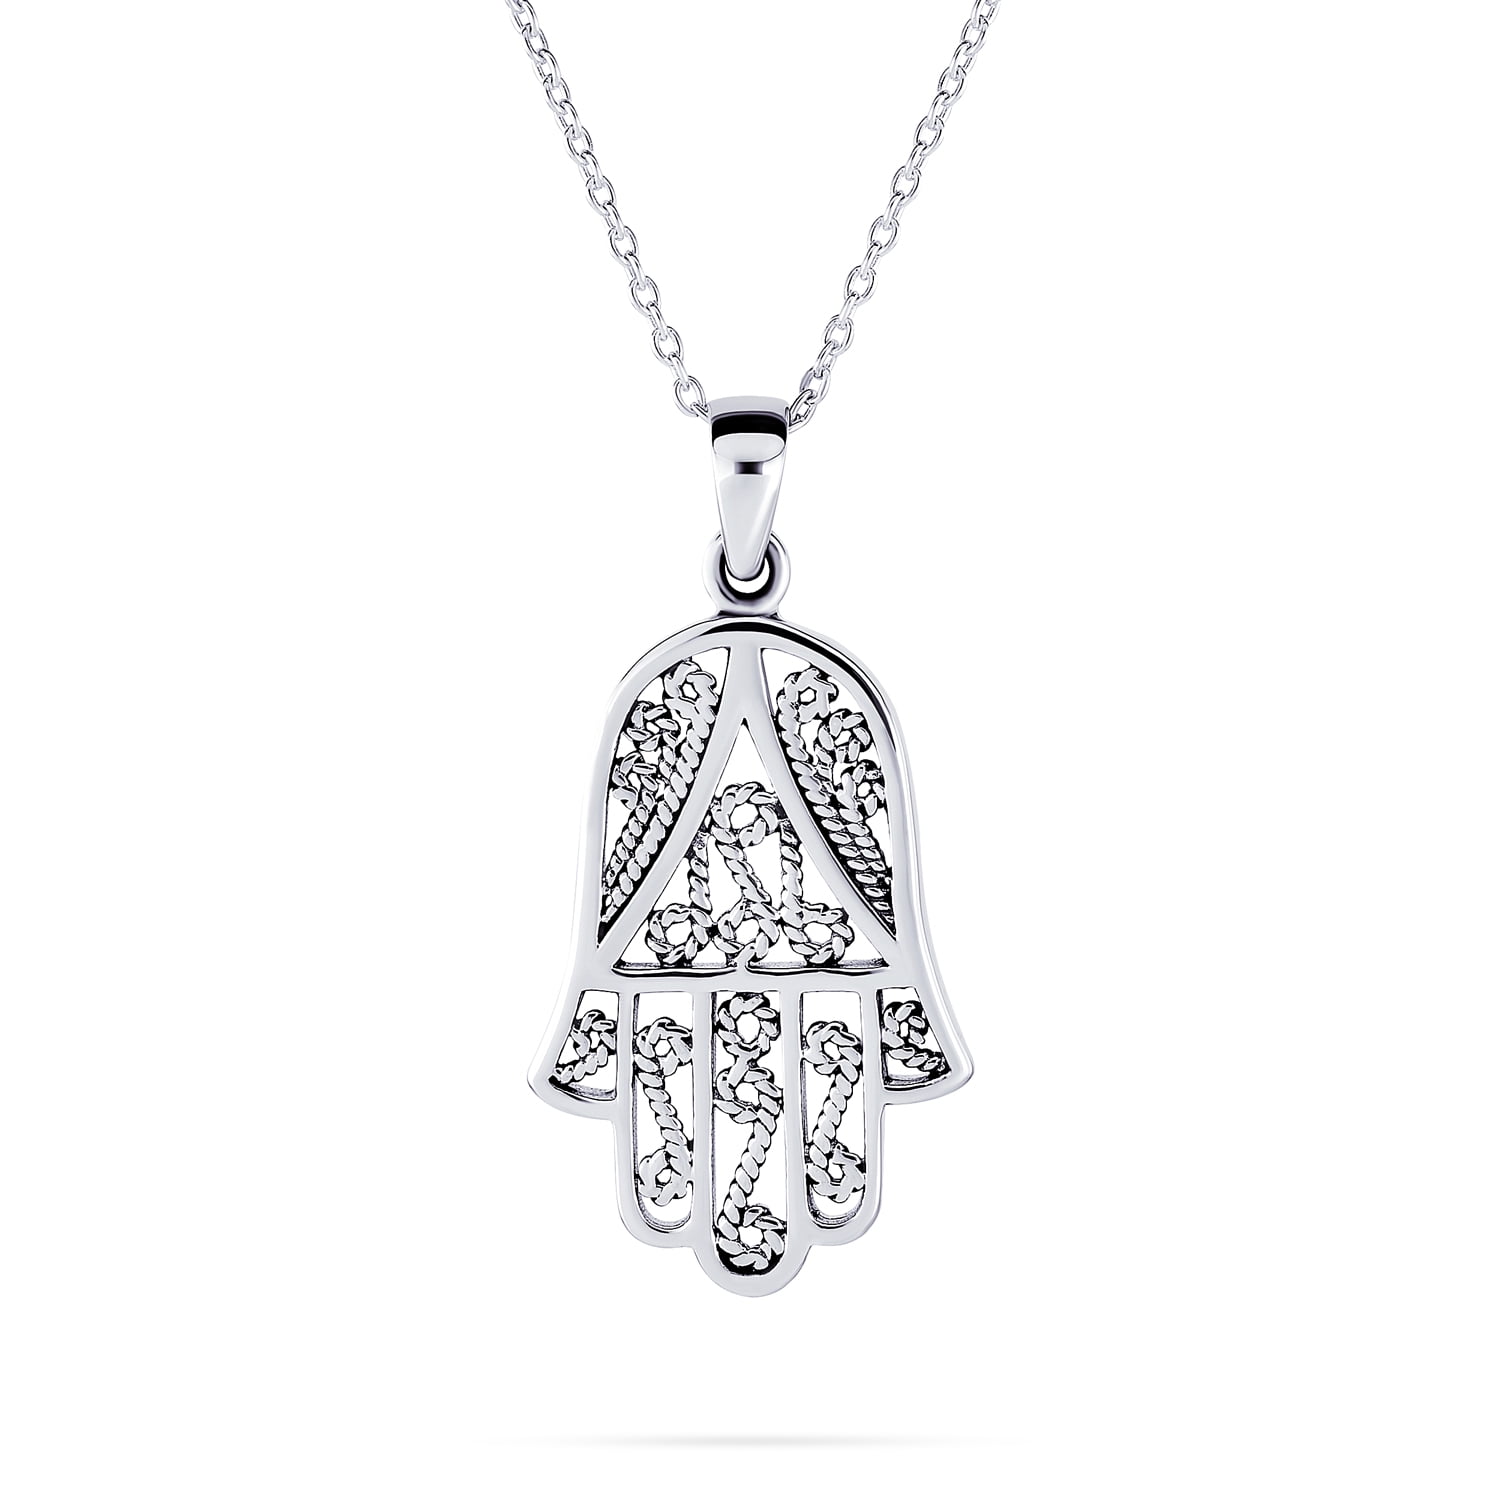 charm metall Hand of Fatima/Mary necklace Sterling silver 925 Hamsa pendant 